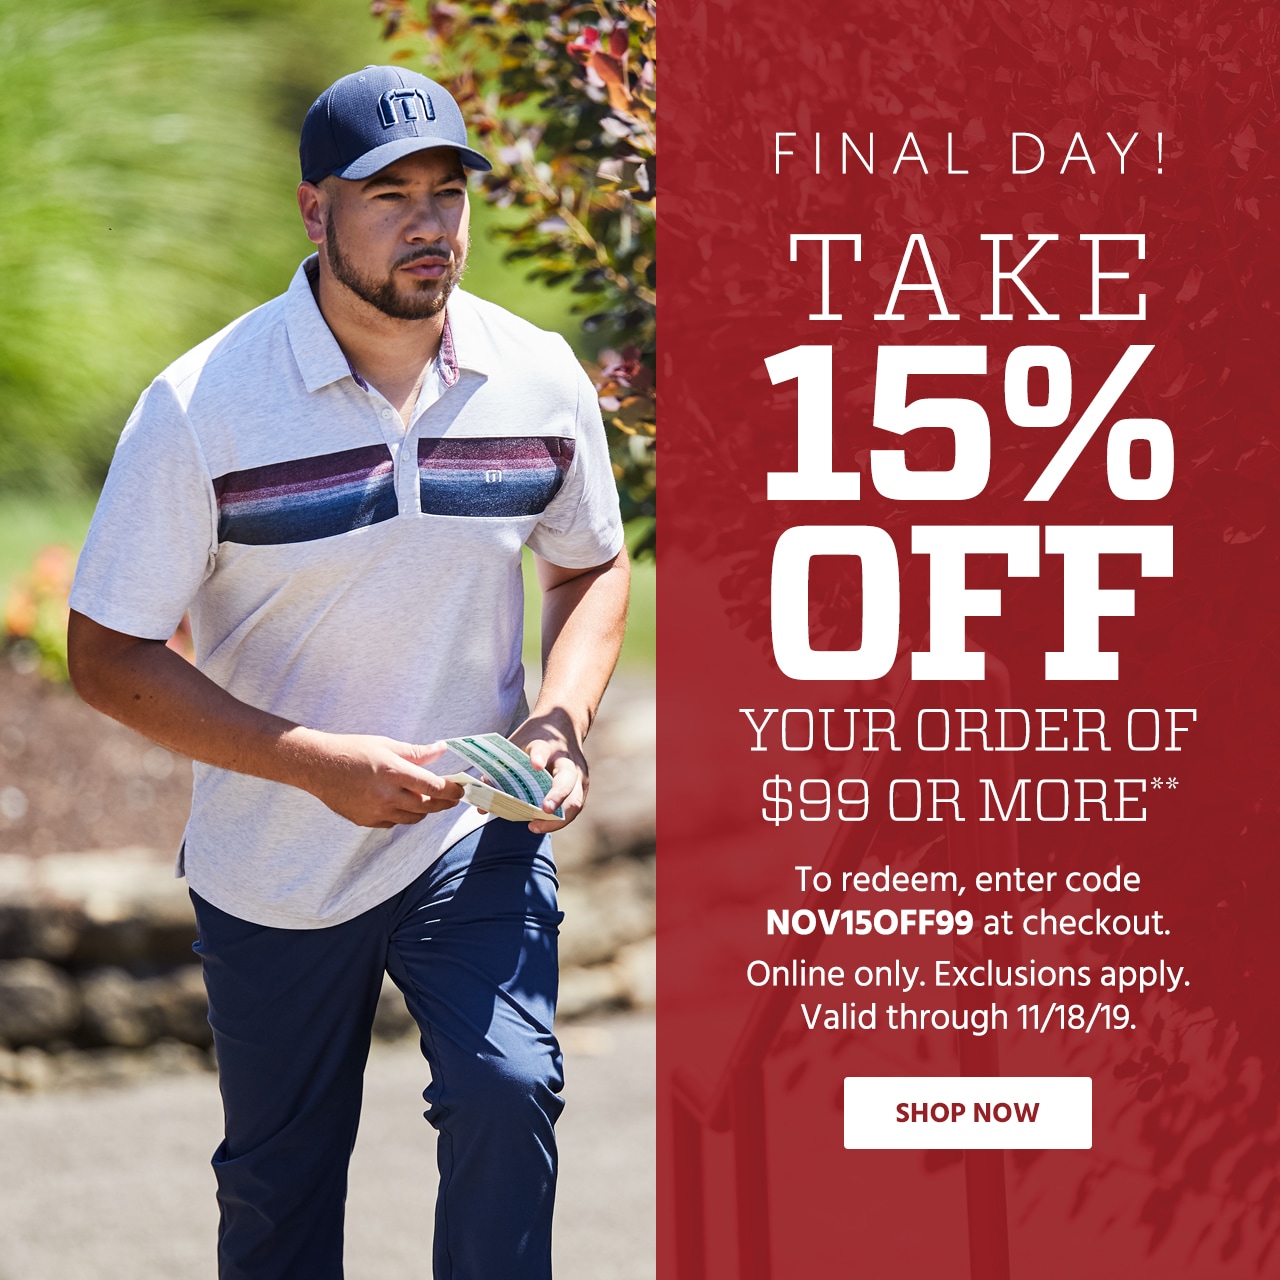 Limited Time! Take 15% Off Your Order of $99 or More**. To redeem, enter code NOV15OFF99 at checkout. Online only. Exclusions apply. Valid through 11/18/19. After, November 18, 2019, 11:59PM PT, sorry! You missed this promotion, but you can still shop this week's deals. Shop Now.